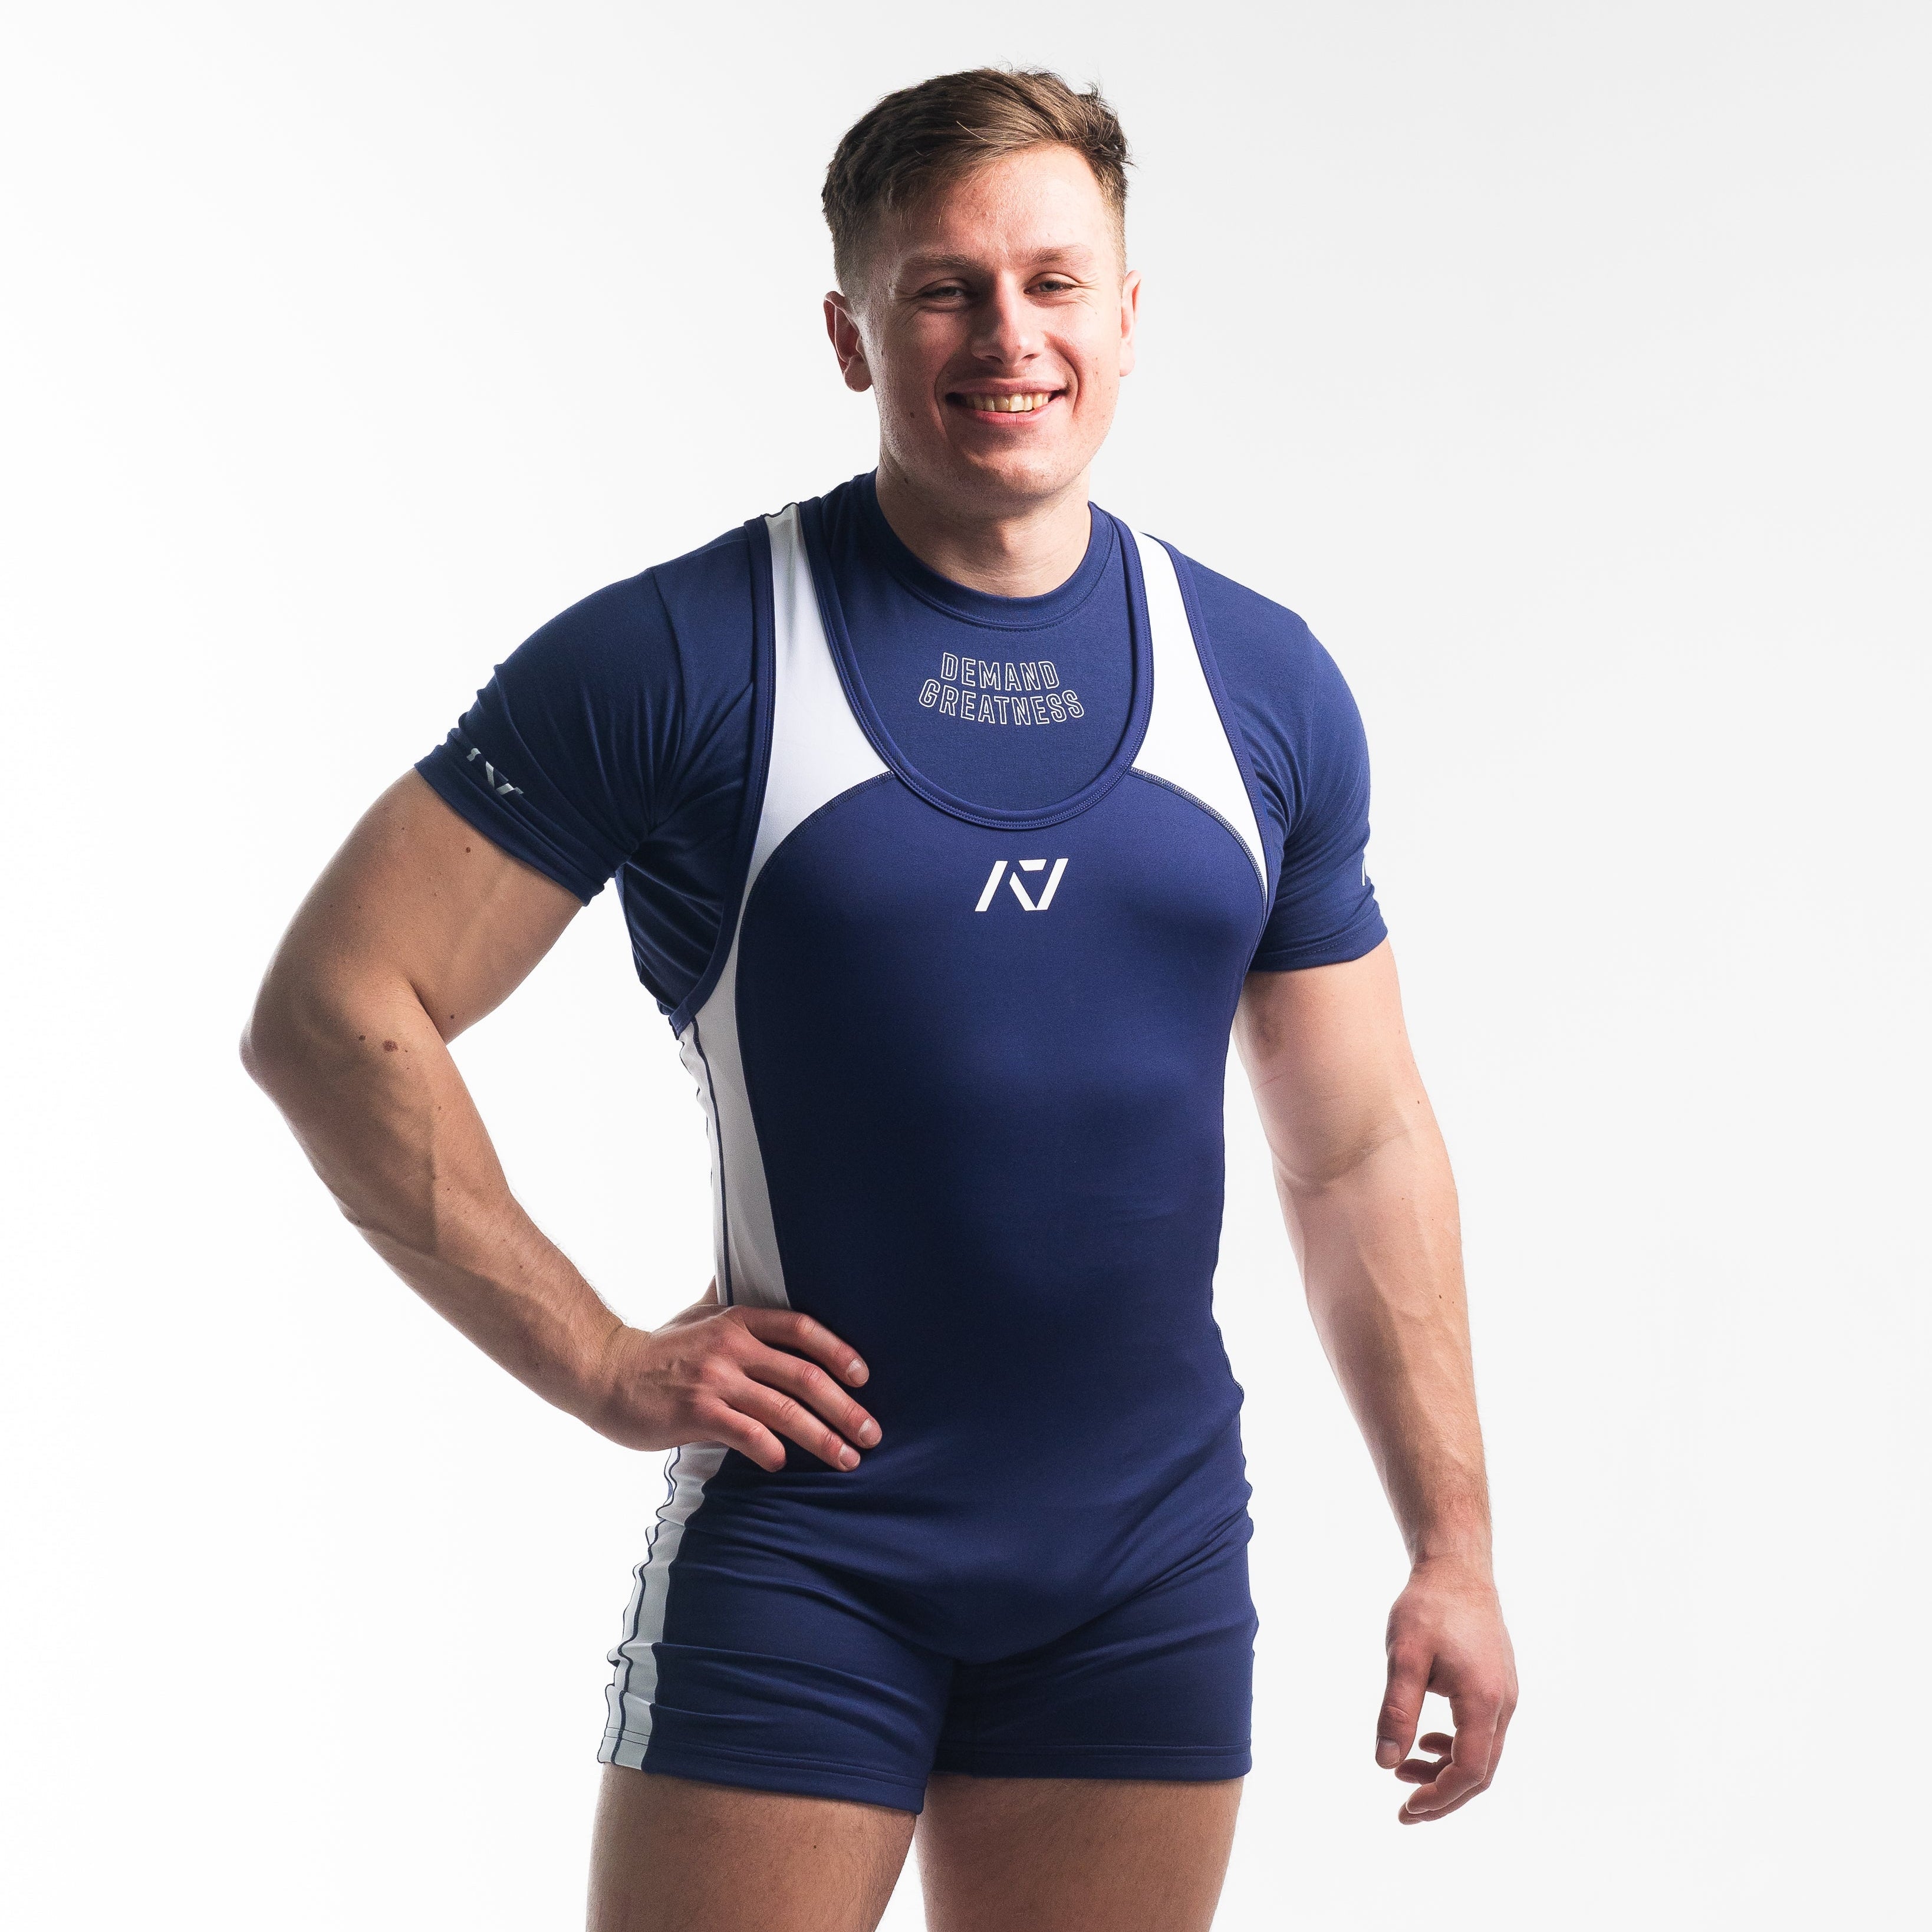 A7 IPF Approved NightLight Luno singlet with extra lat mobility, side panel stitching to guide the squat depth level and curved panel design for a slimming look. The Women's cut singlet features a tapered waist and additional quad room. The IPF Approved Kit includes Powerlifting Singlet, A7 Meet Shirt, A7 Zebra Wrist Wraps, A7 Deadlift Socks, Hourglass Knee Sleeves (Stiff Knee Sleeves and Rigor Mortis Knee Sleeves). Genouillères powerlifting shipping to France, Spain, Ireland, Germany, Italy, Sweden and EU.